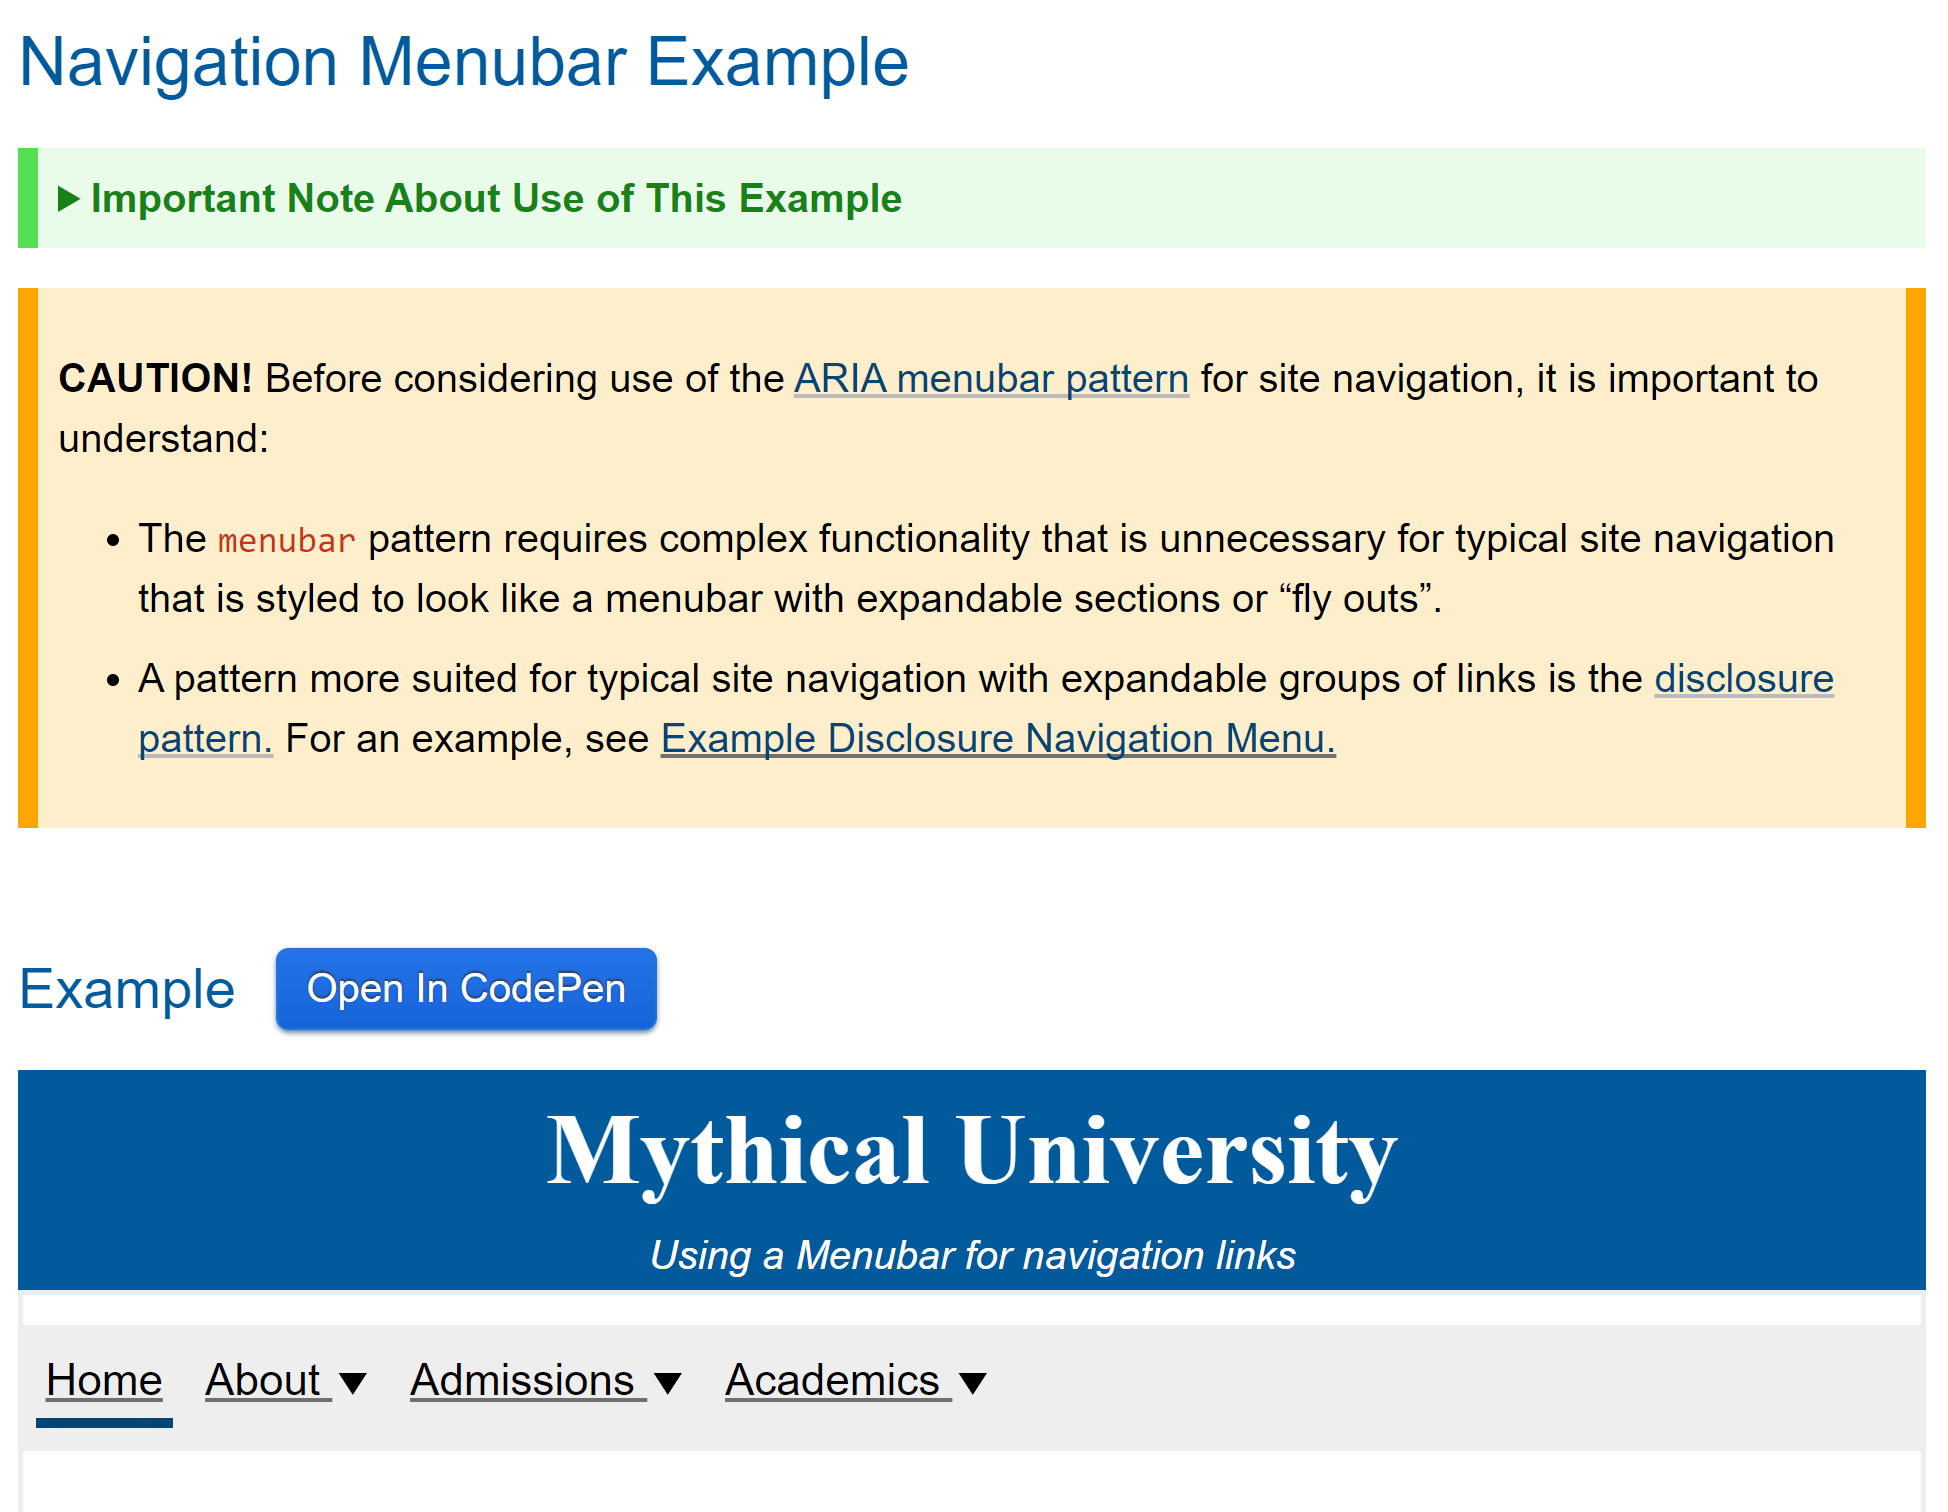 screenshot of the ARIA Practices example of using a menubar role for site navigation, showing a warning about using menubar for site navigation